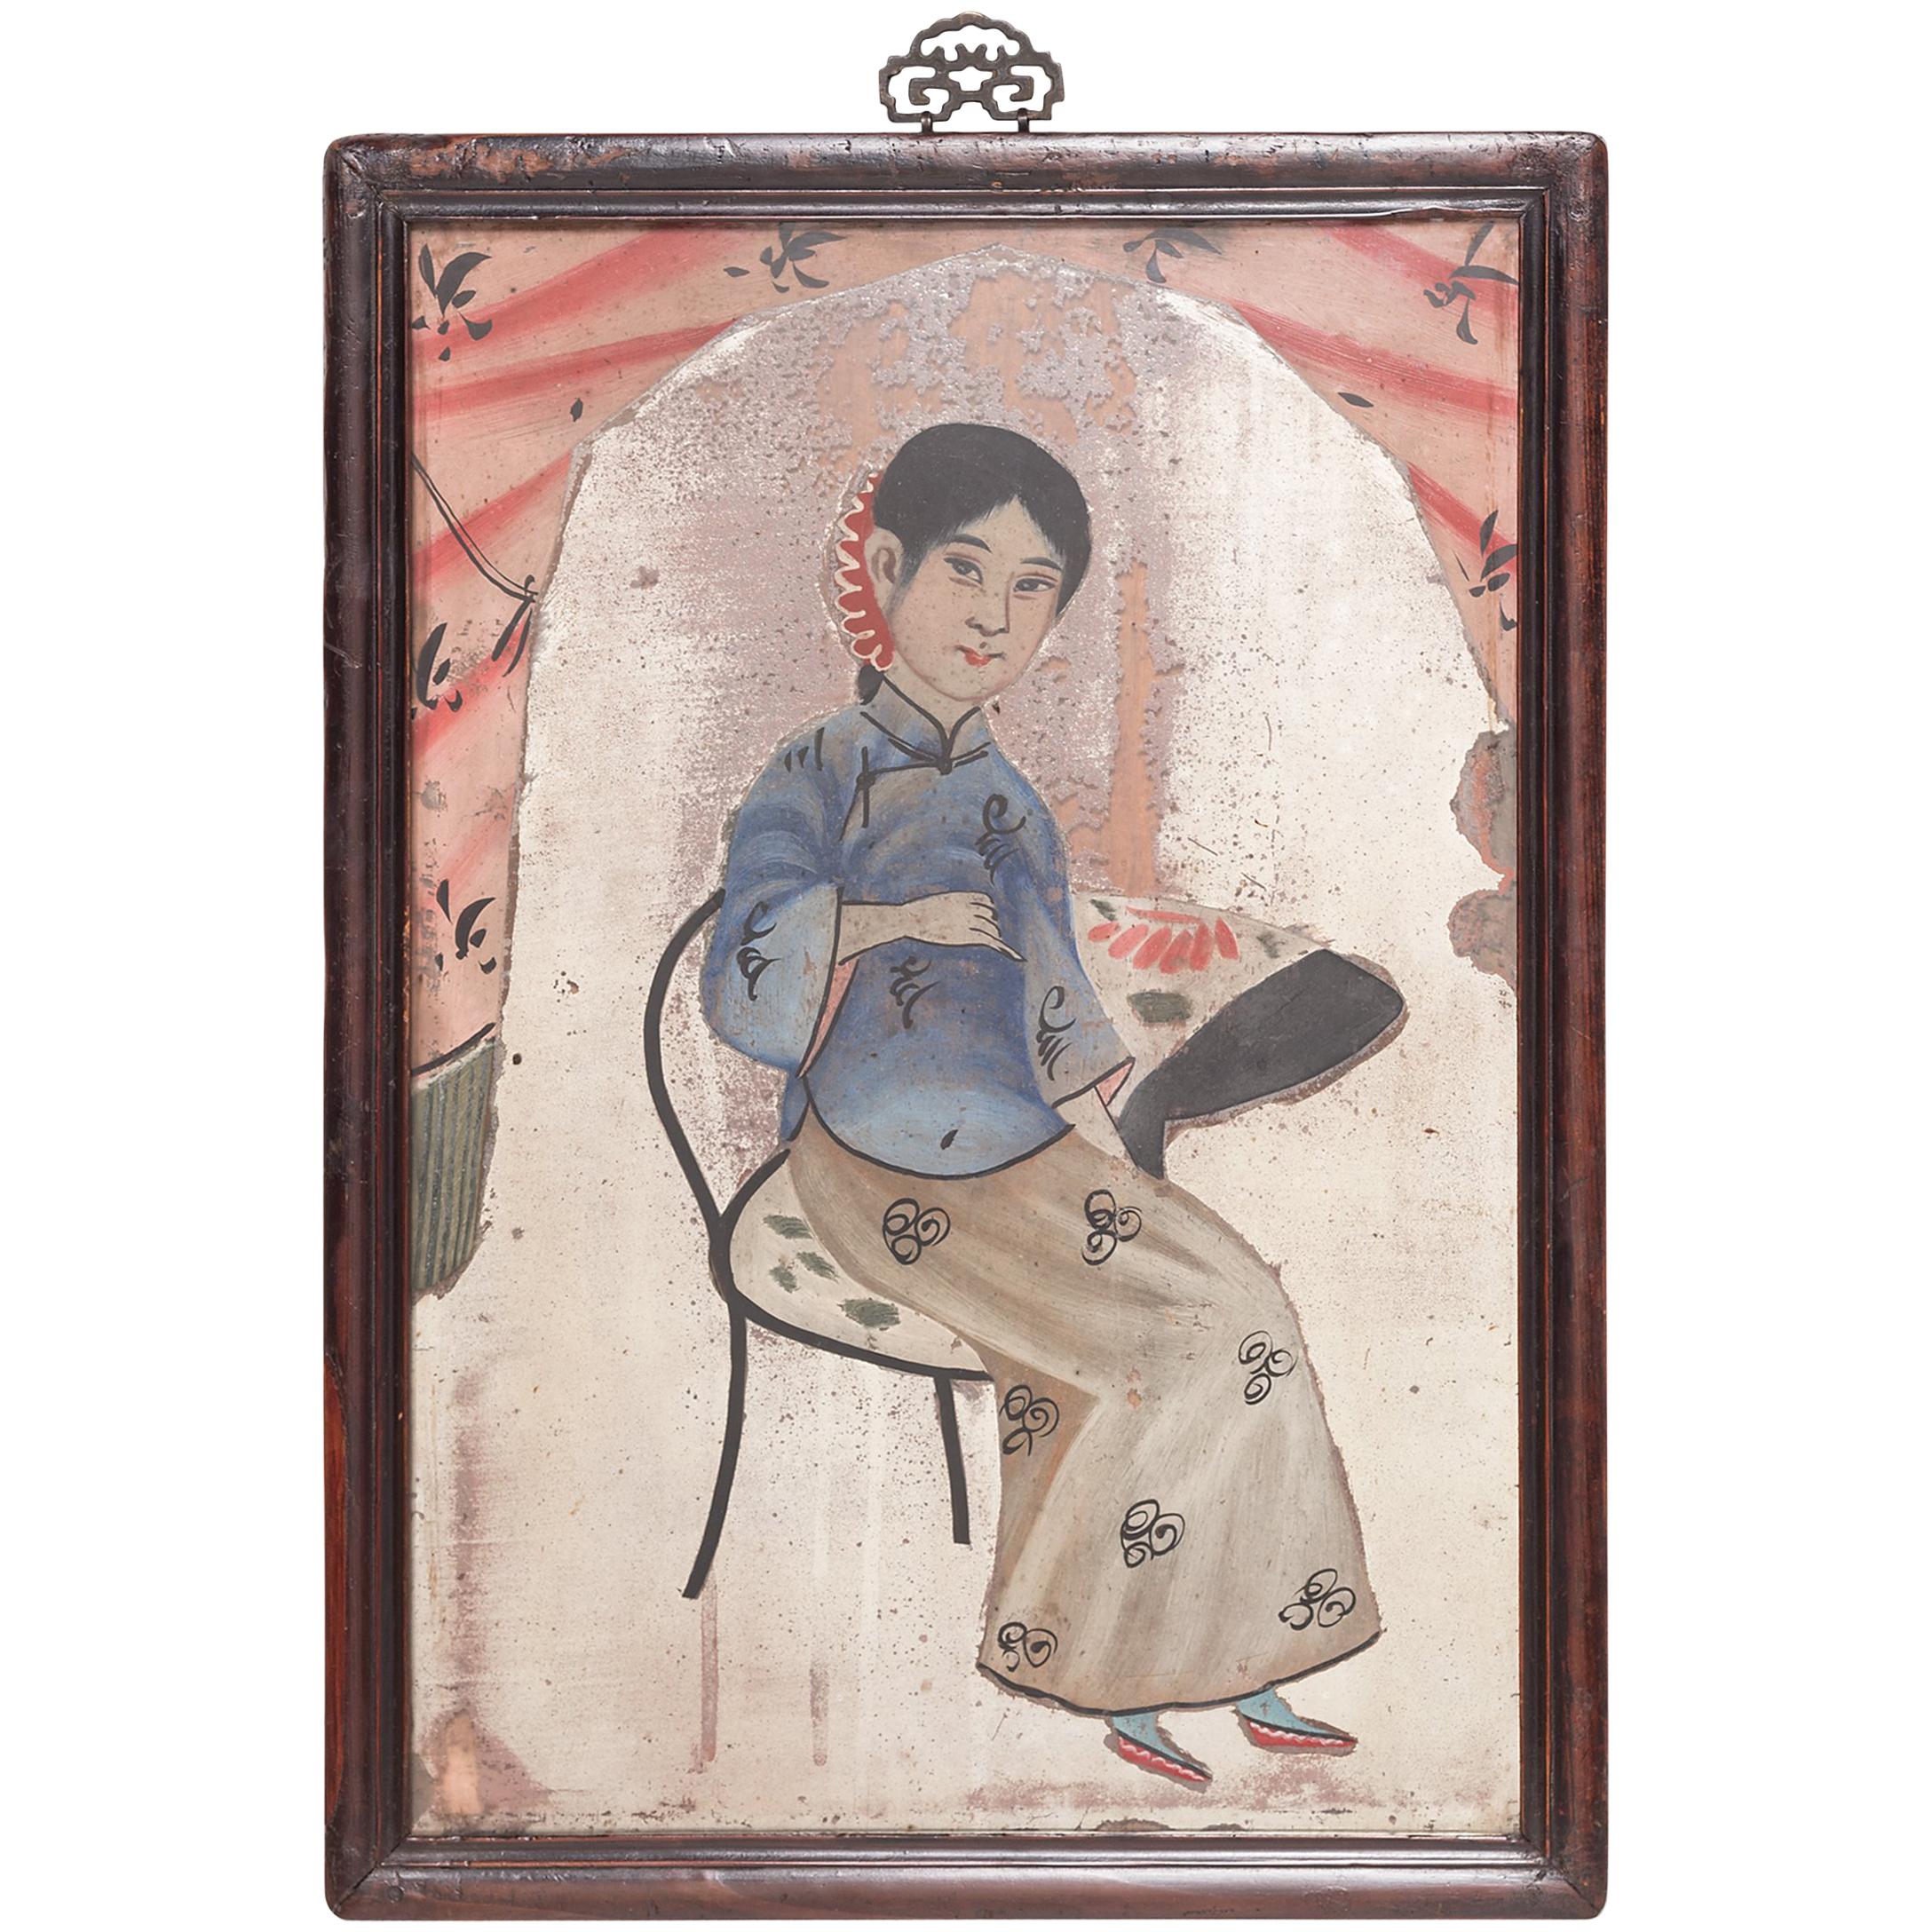 With its sparkling color and Folk Art appeal, these early 20th century. portrait paintings are charming examples of reverse glass painting, in which an artist composes the painting in reverse on the back of a piece of glass. Thought to have